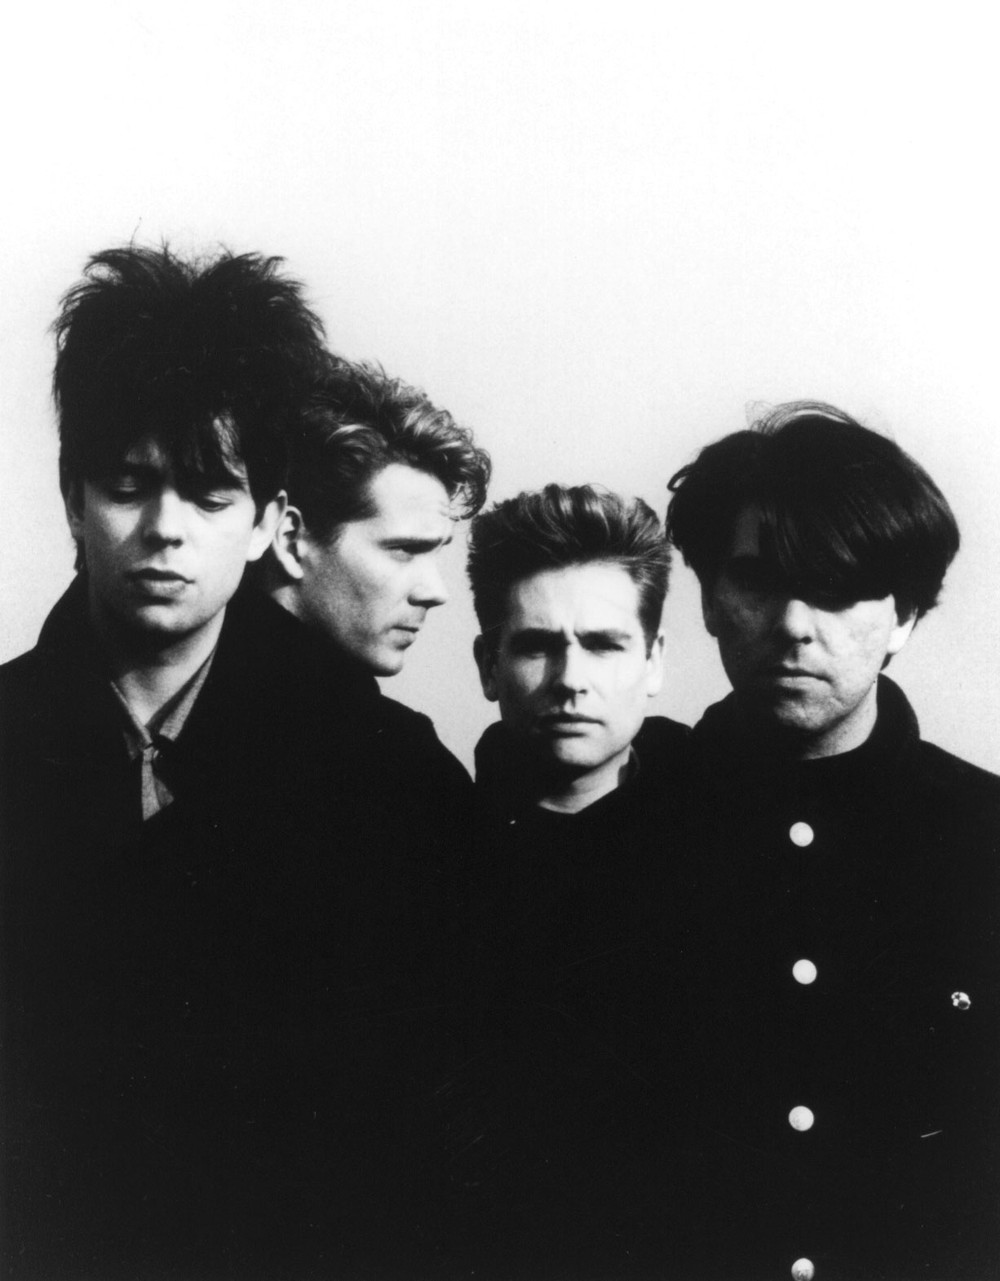 Echo and The Bunnymen: Songs To Learn - Sing en History Tickets